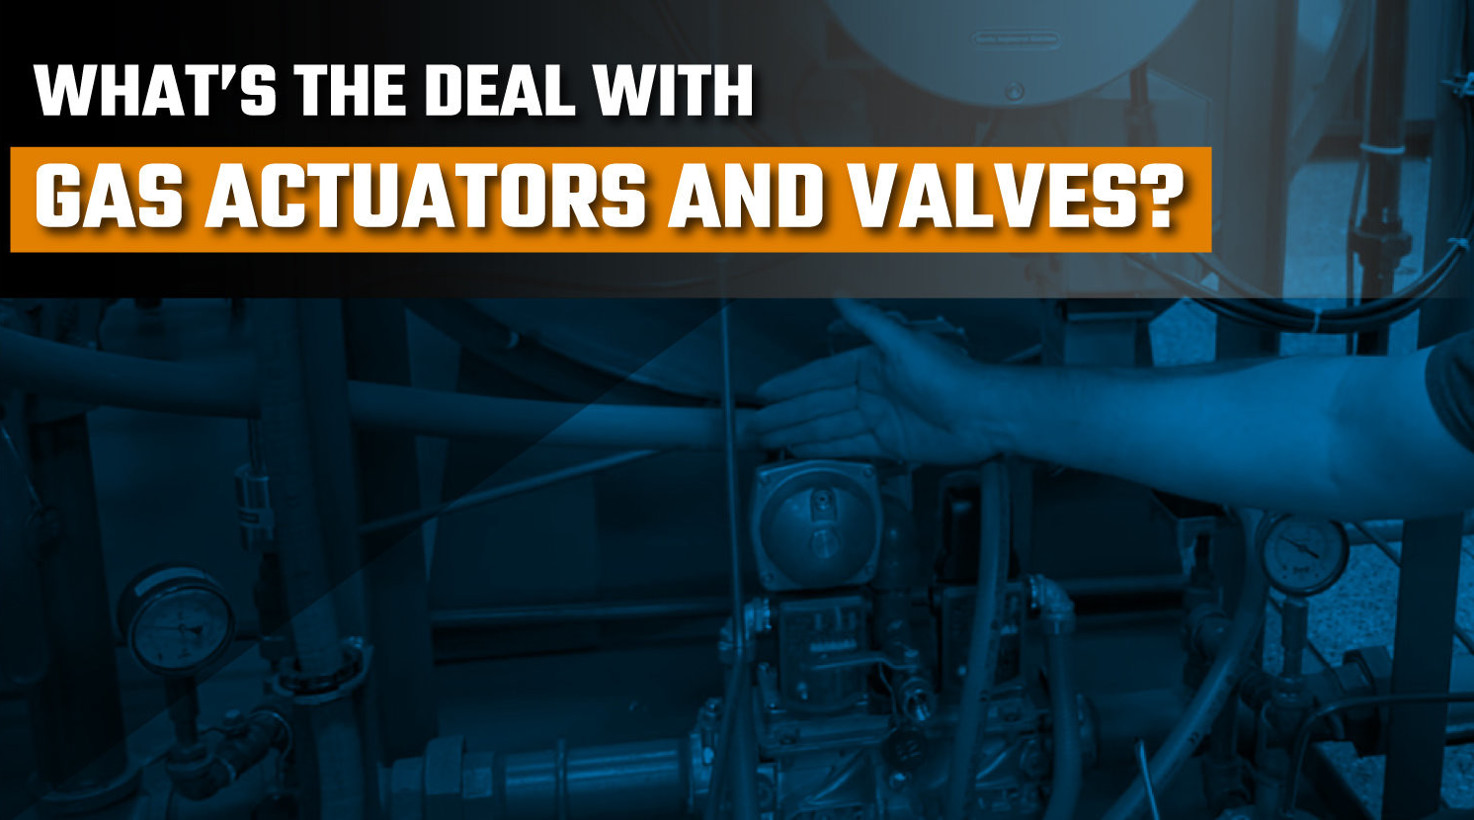 What’s the Deal With Gas Actuators and Valves?